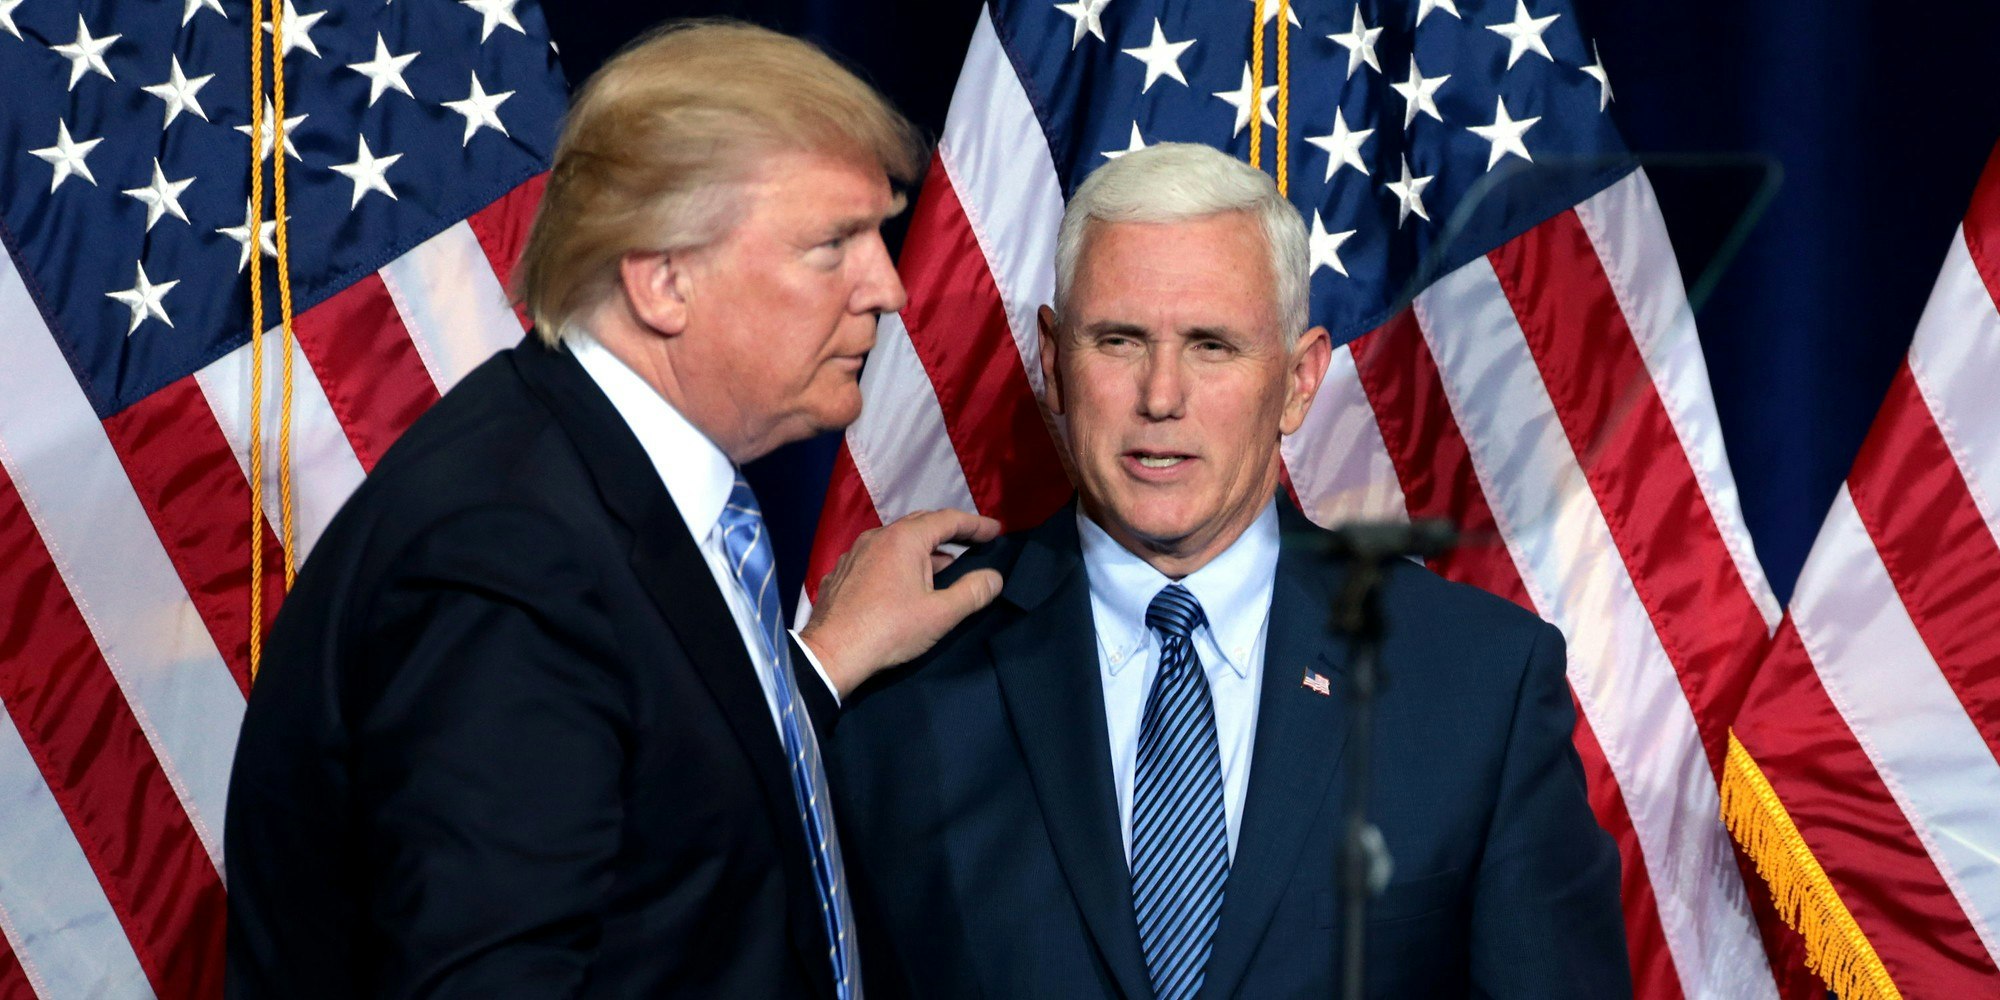 Did Pence unfollow Trump on Twitter? - The Daily Dot